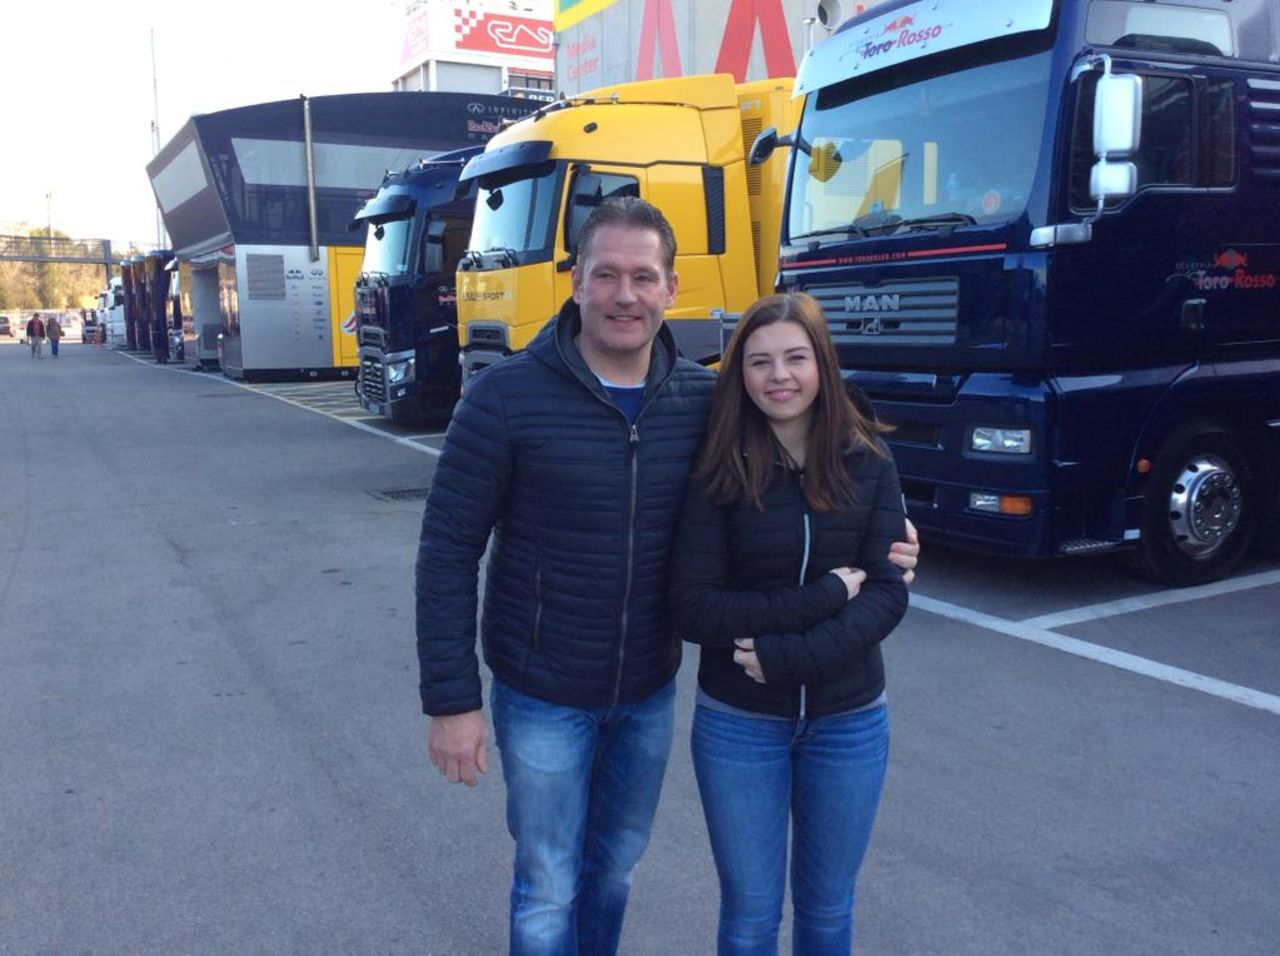 Sister Victoria Verstappen and Jos watched Max in Barcelona testing in February. He says of his sister's own racing style:  "She has more the character of my Dad. She's more aggressive when she's driving, it's quite funny to see."